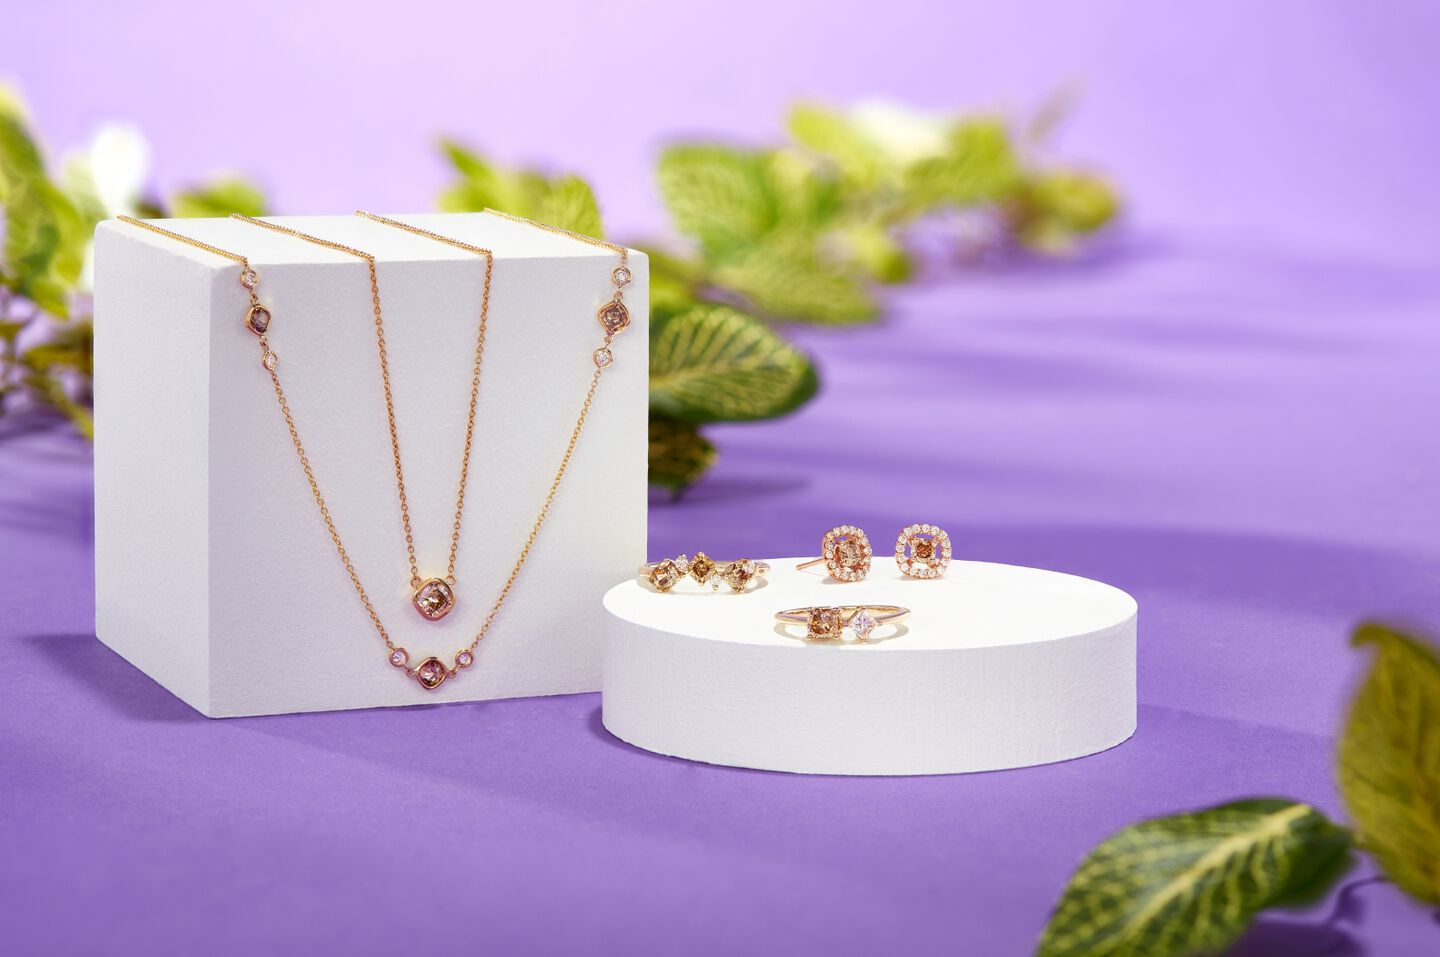 brown diamond jewelry on display with a purple background